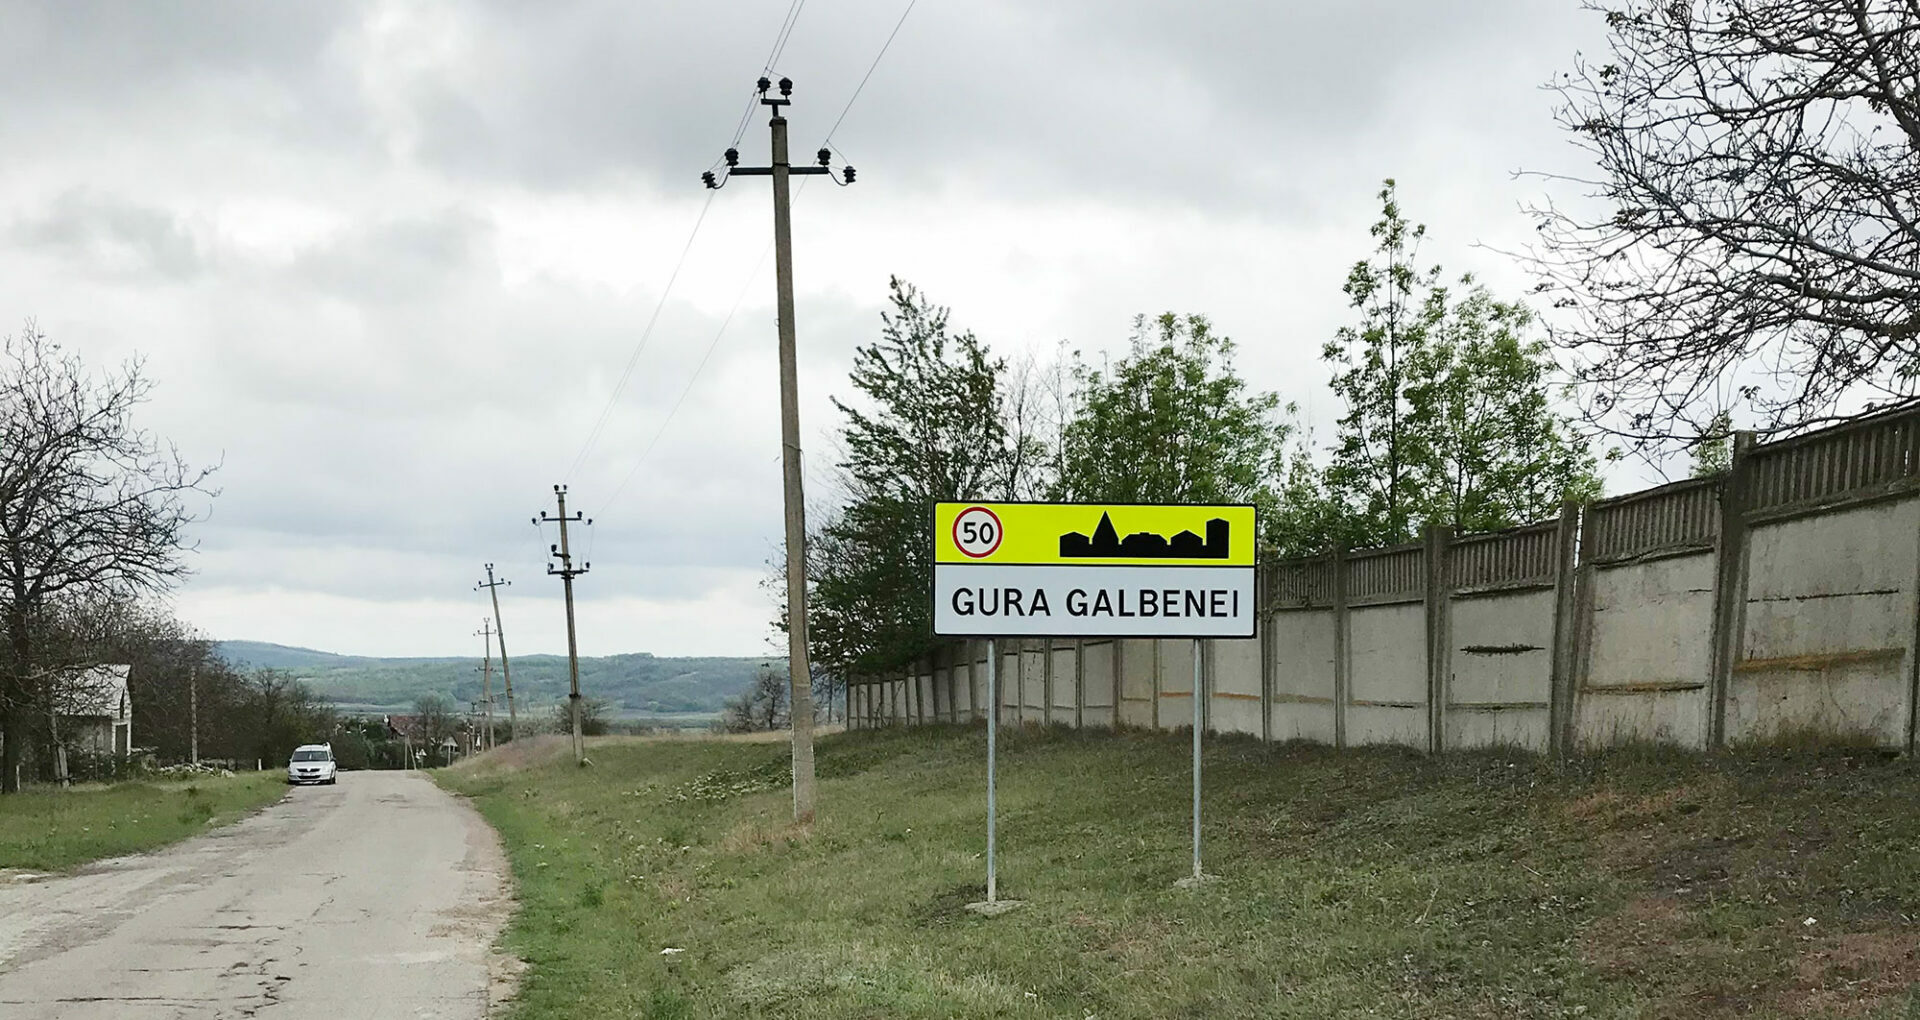 The Coronavirus and the Drought Make the Future Unsure for the People in a Moldovan Village